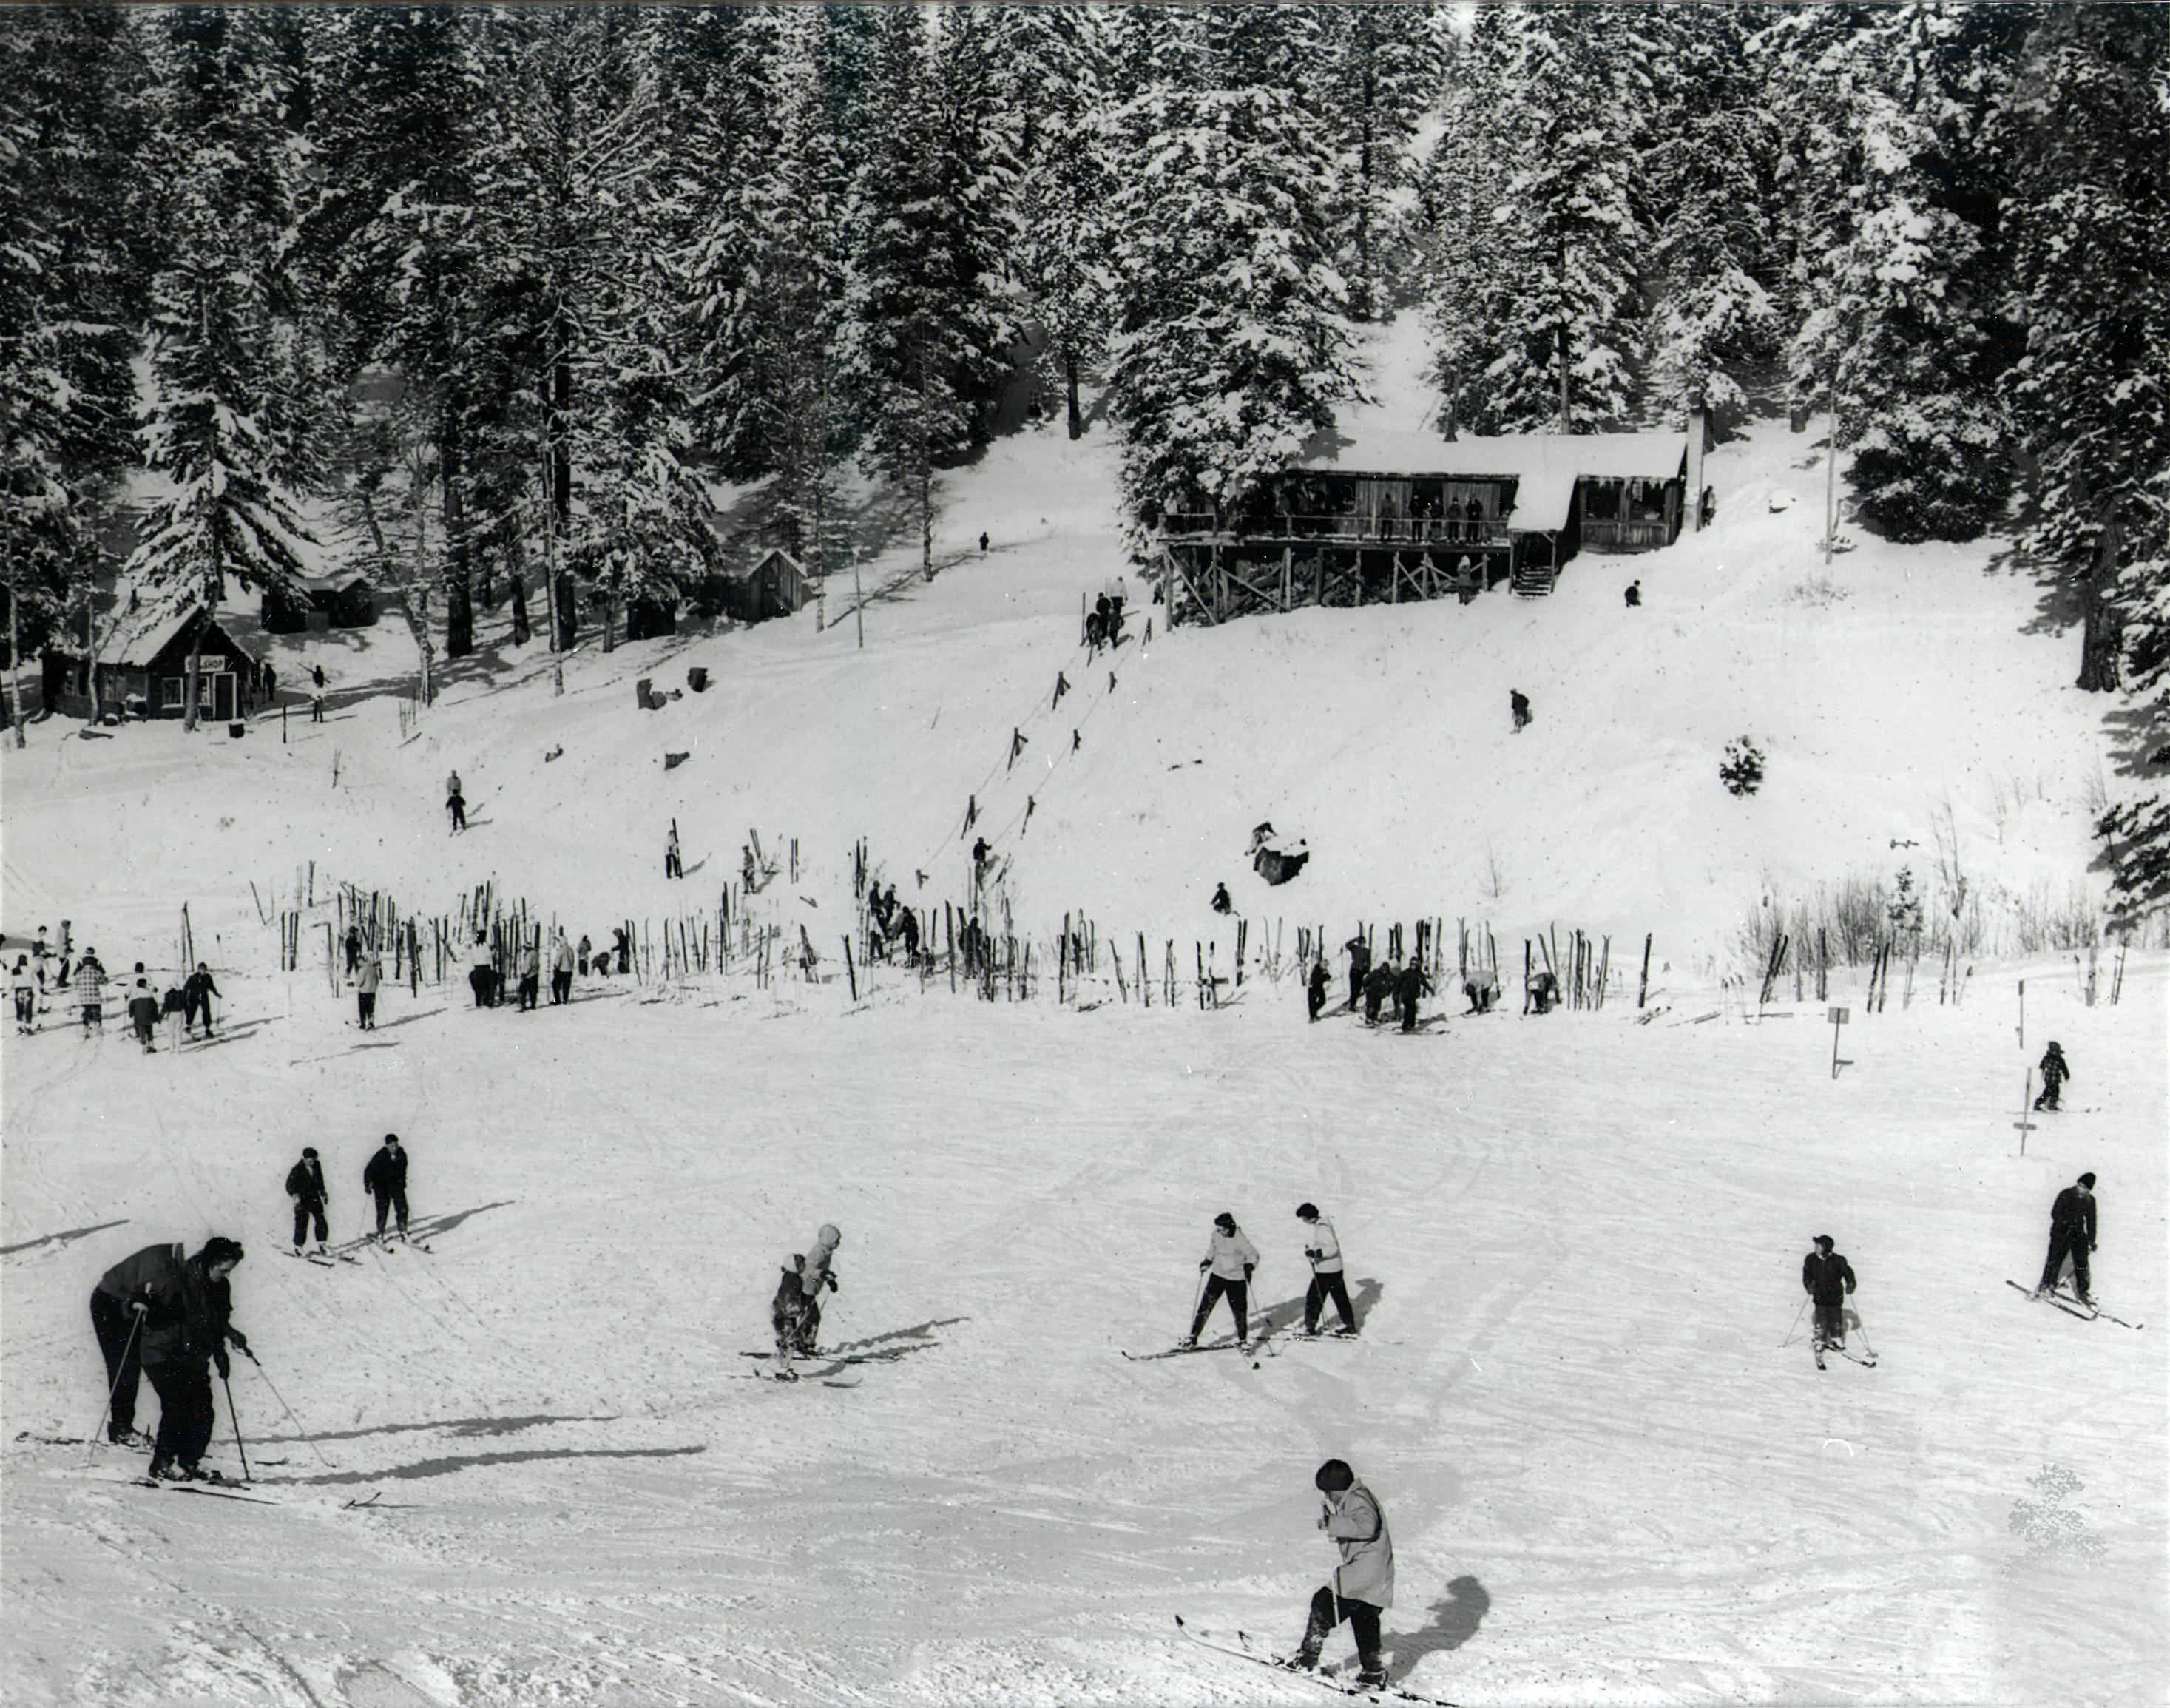 The history of Bogus Basin